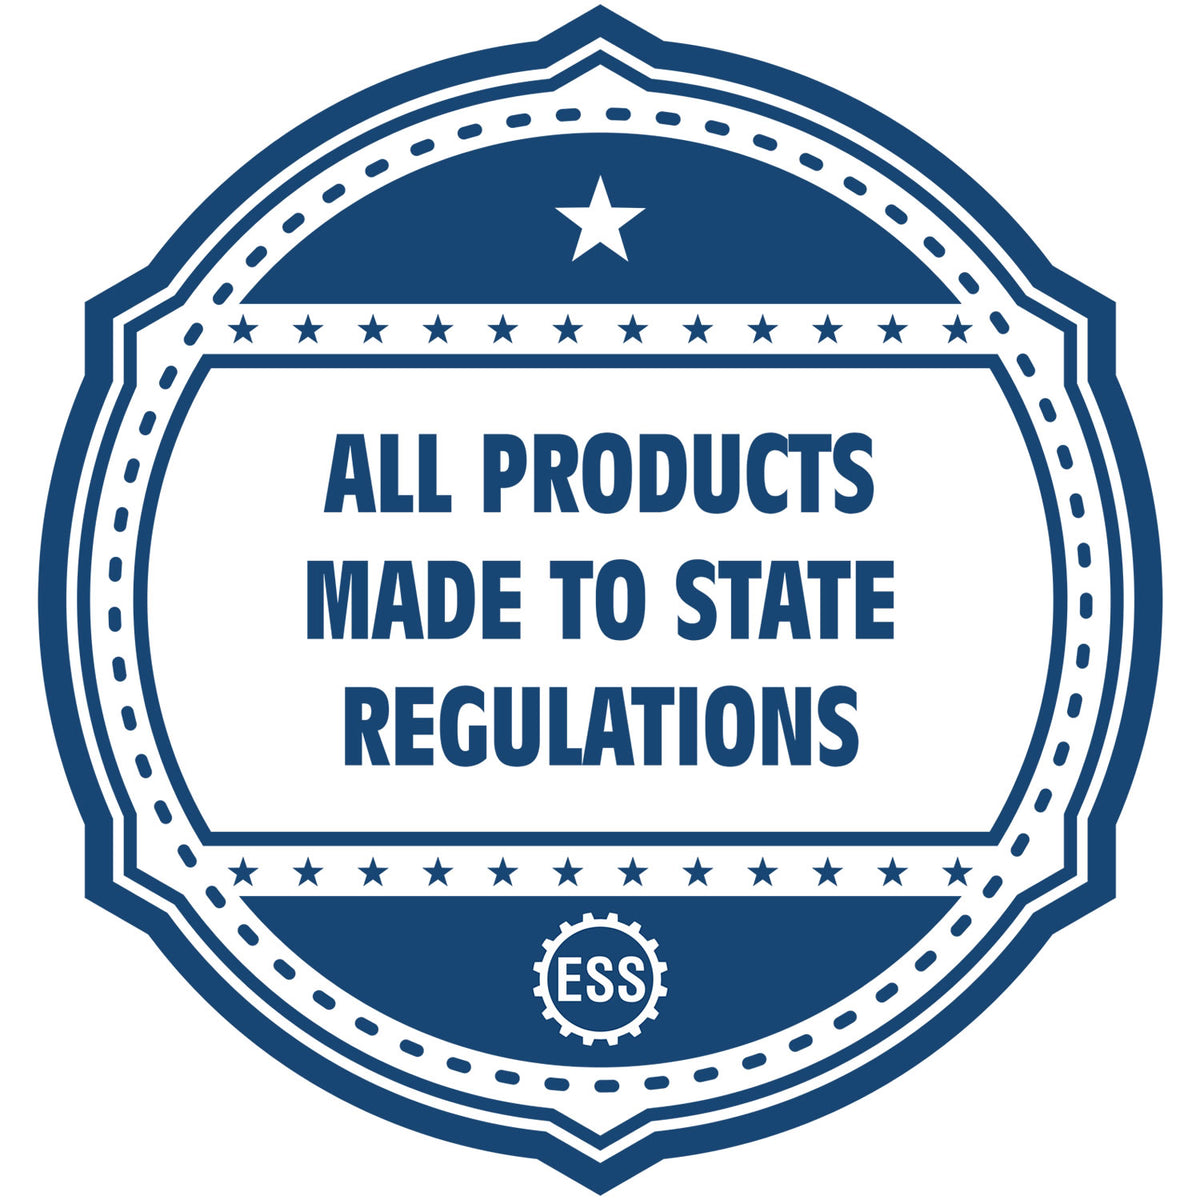 An icon or badge element for the State of Michigan Long Reach Architectural Embossing Seal showing that this product is made in compliance with state regulations.